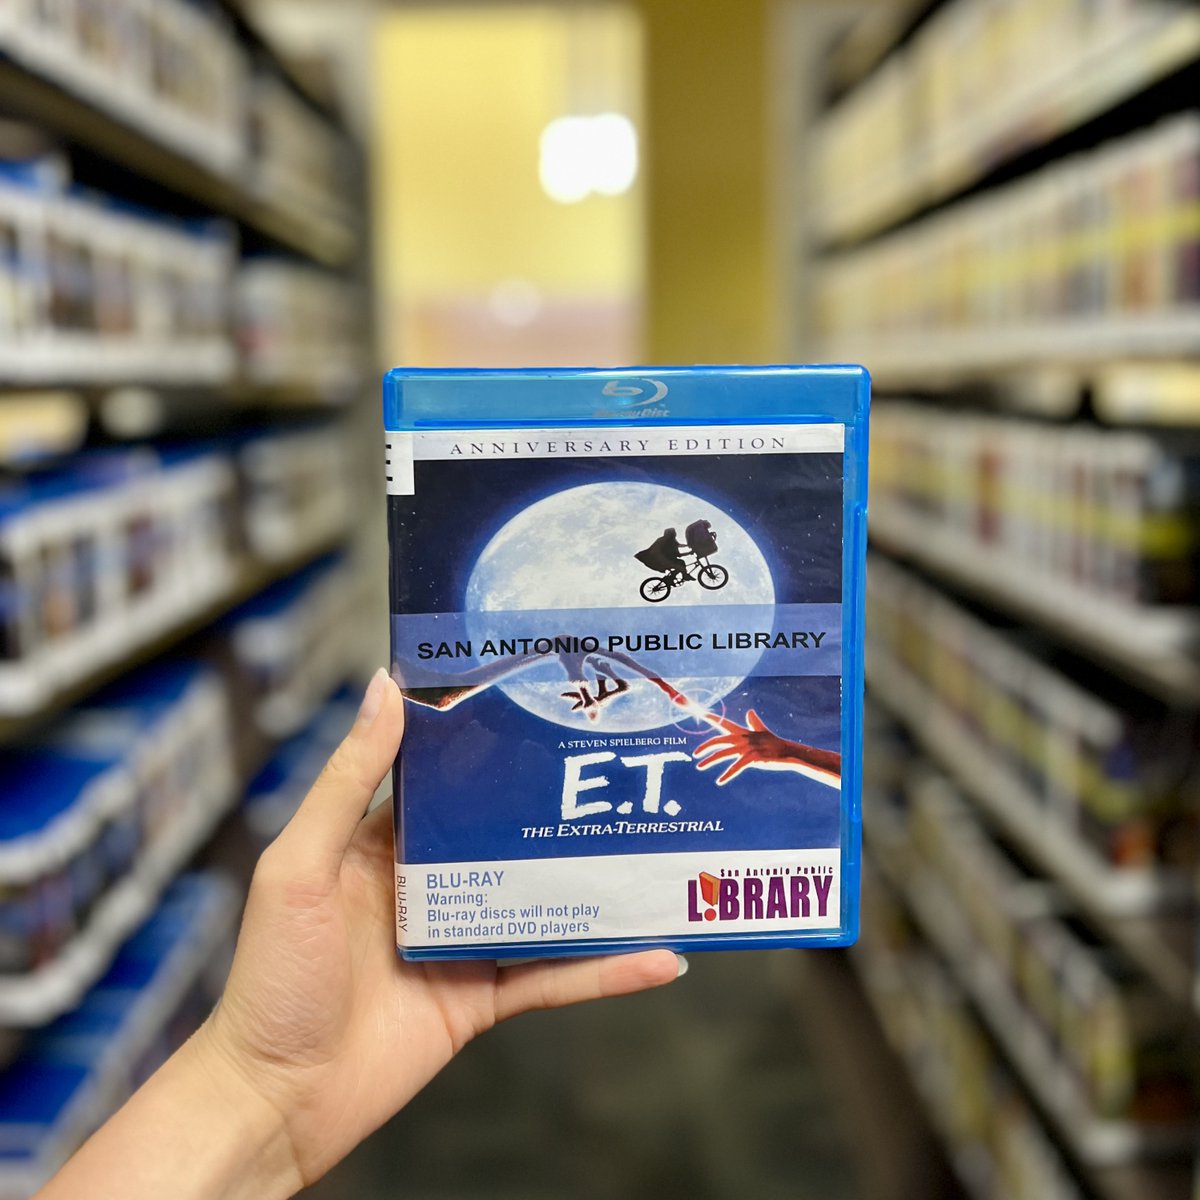 🚀 ”E.T. phone home!” Blast off on a literary journey through space and time with our sci-fi selection! From stories and movies with aliens to futuristic adventures, there's something for every sci-fi fan to enjoy. 🌌📖 #SciFiMovies #SciFiReads #SAPL